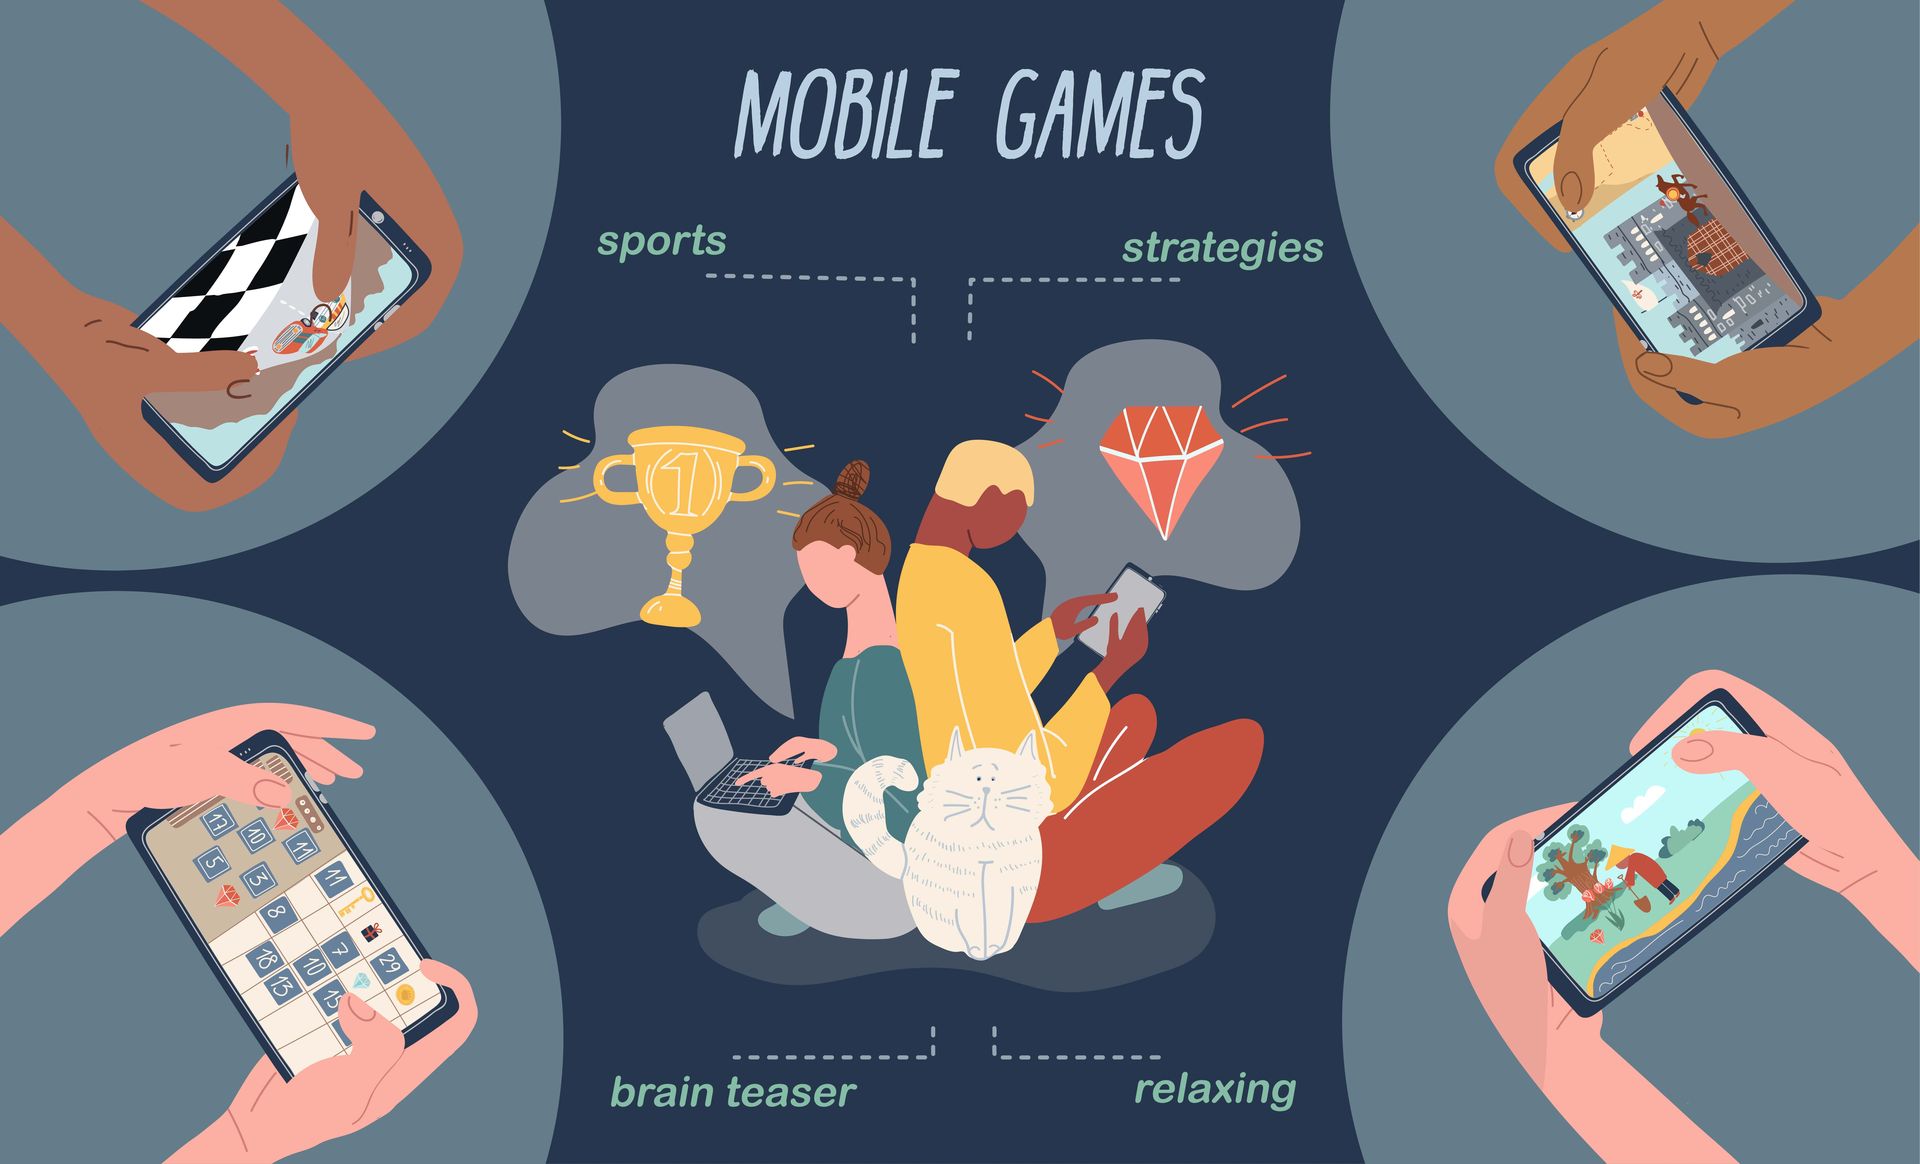 From snake to virtual worlds: The evolution of mobile gaming technology